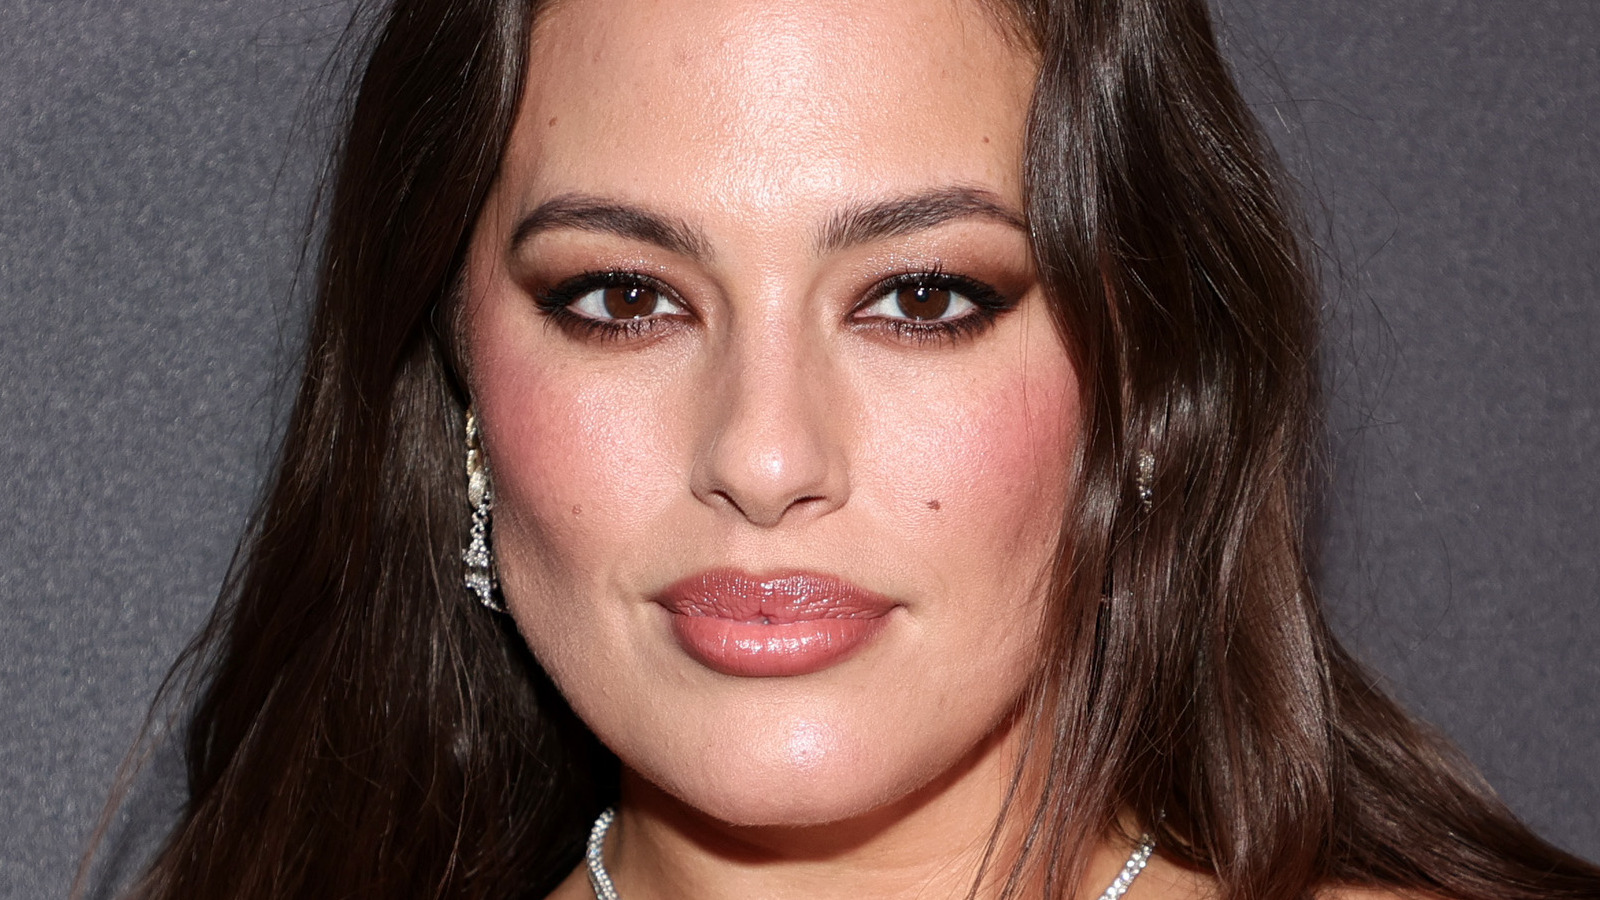 America's Next Top Model: Judge Ashley Graham on Her Tyra Banks Connection